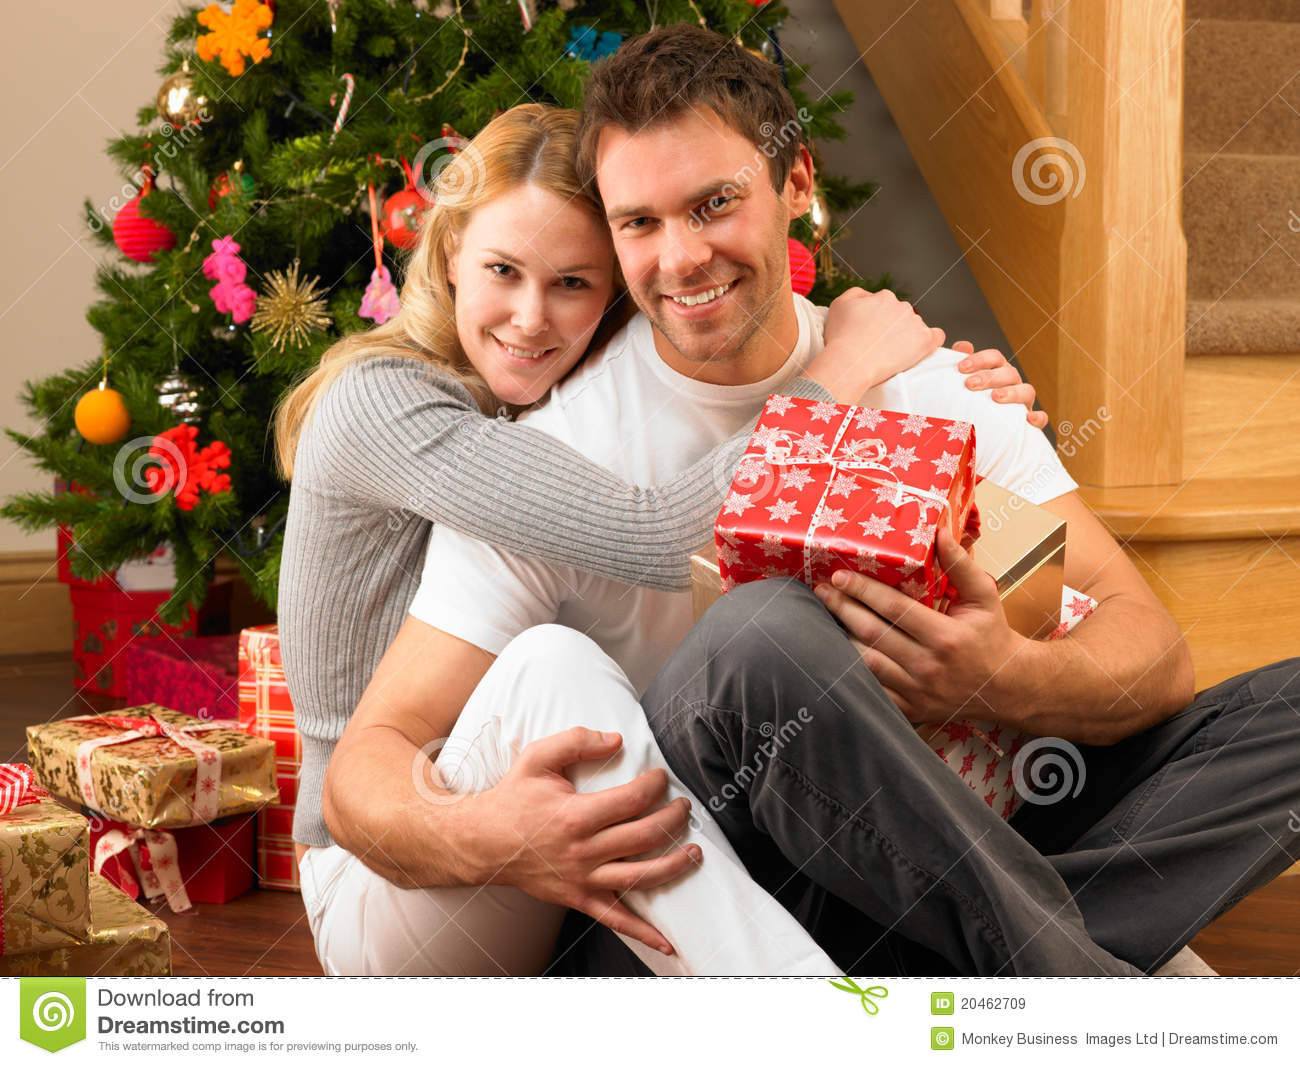 Gift Ideas For Young Couples
 20 Best Gift Ideas for Young Couples Home Inspiration